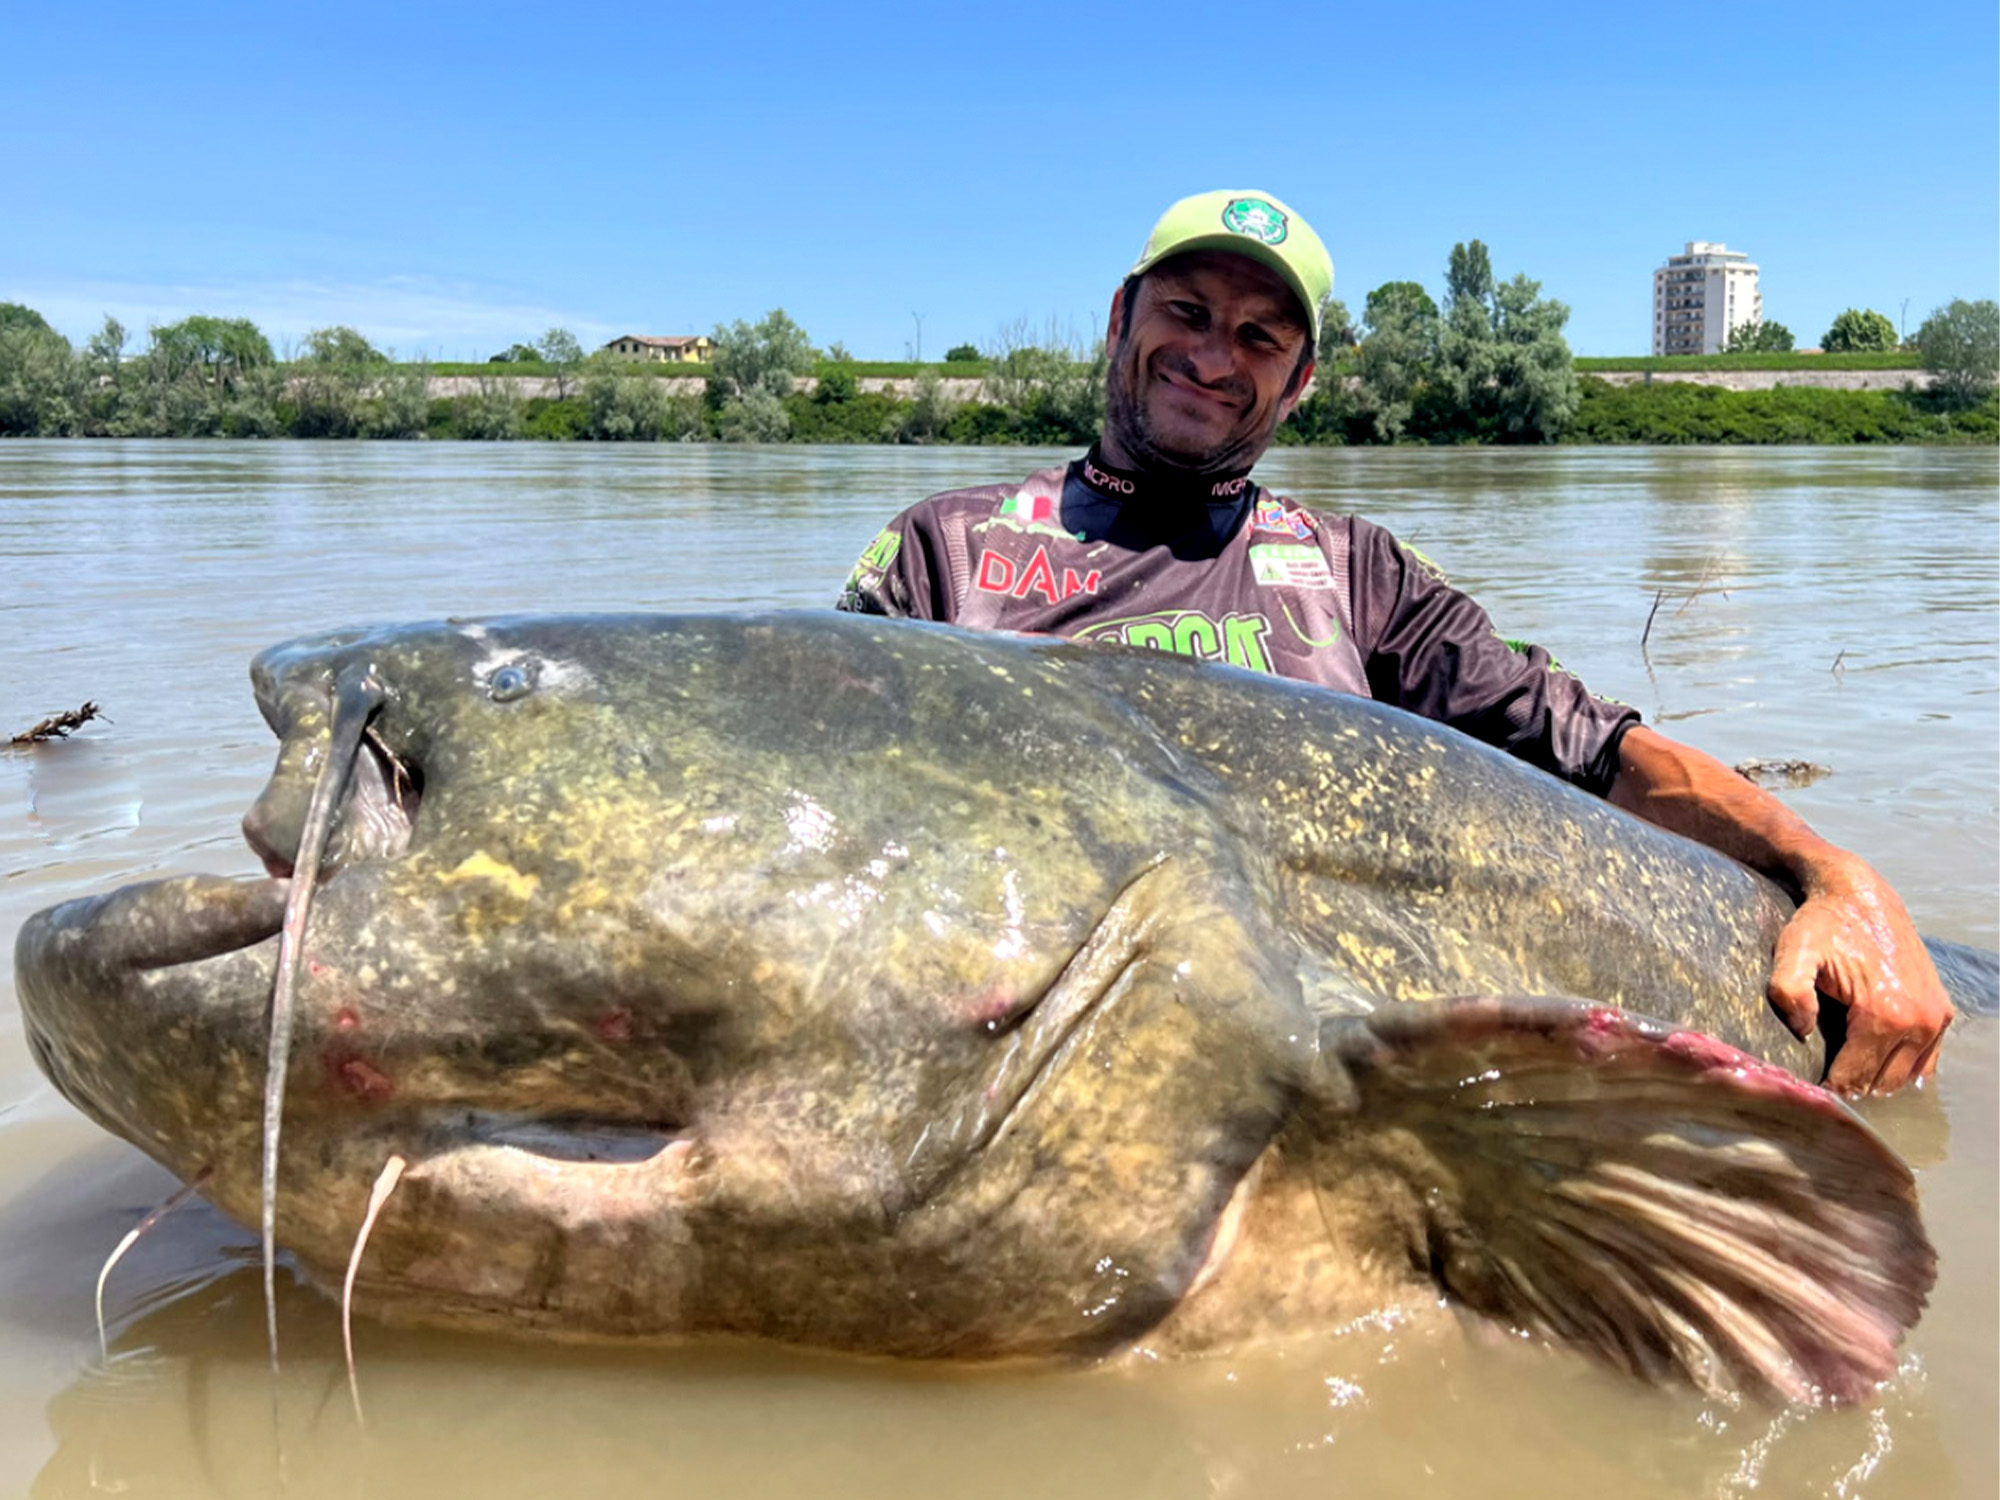 Giant record suze toadfish caught fishing in I hervey bay 🐟 Follow  @fishingnzaus for all the fishing content in NZ and Australia 🫡